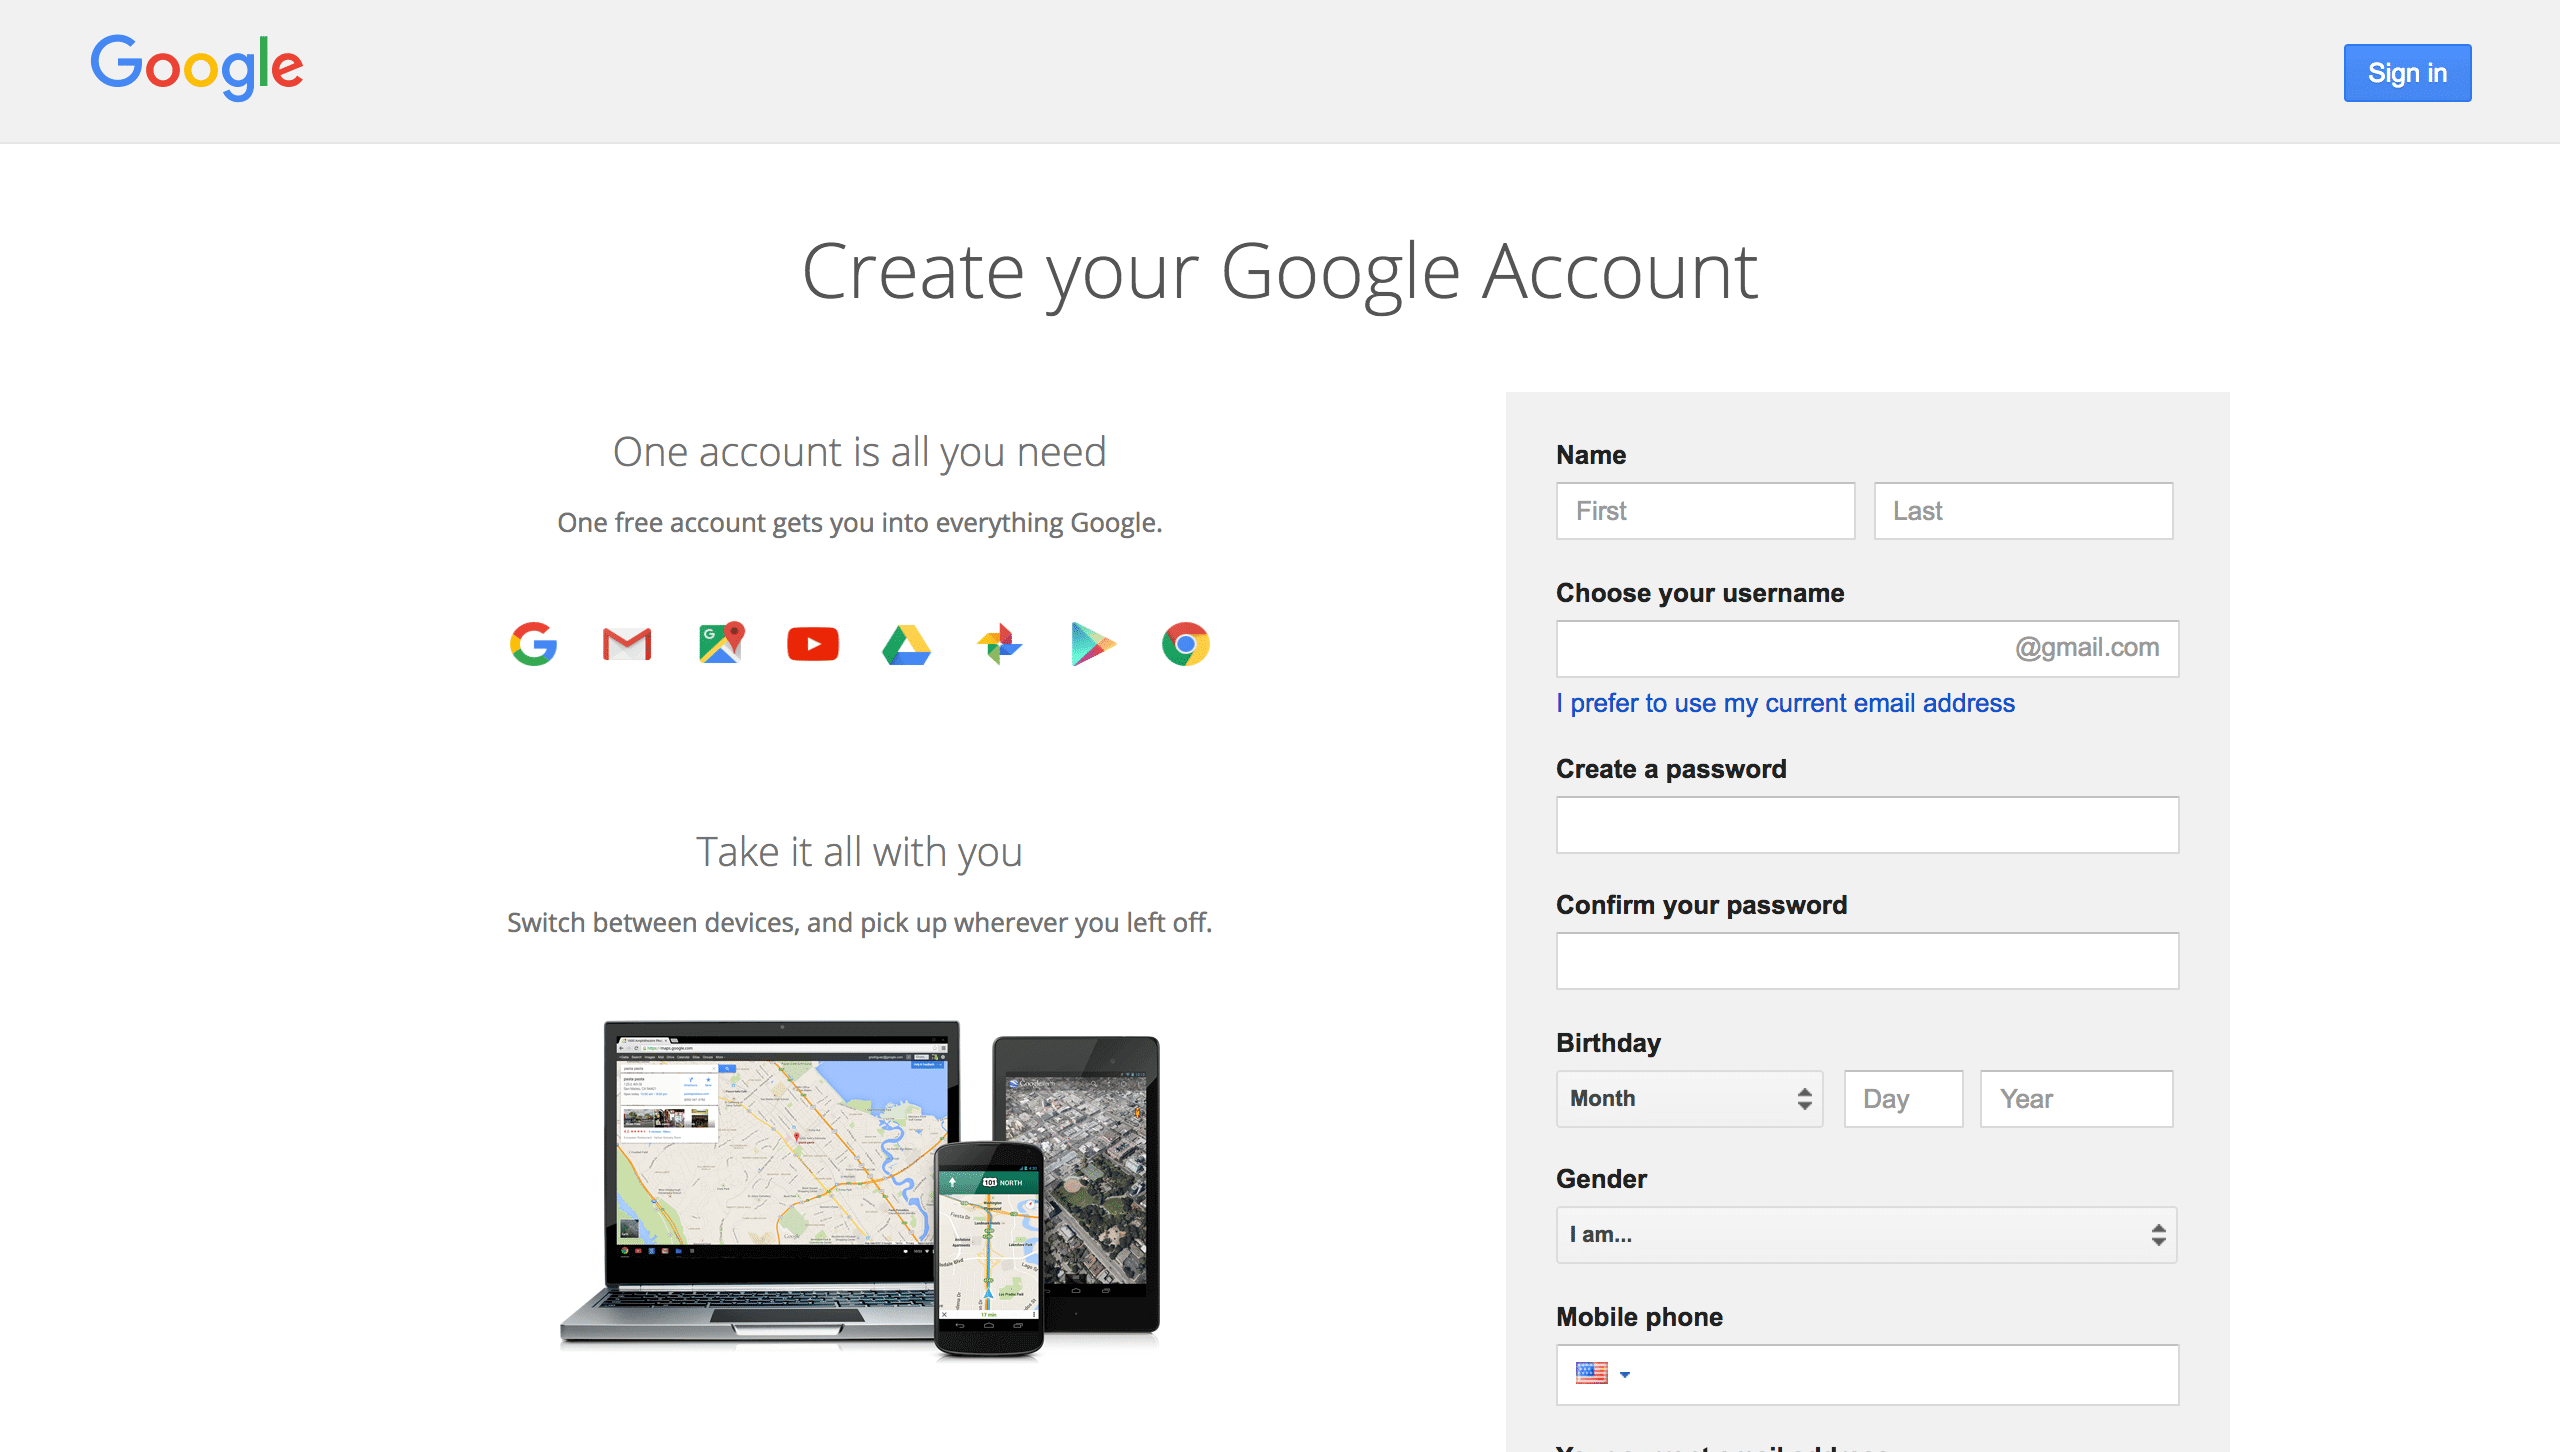 Landing page to create a Google Account with headline, minimal copy, and a sign-up form.